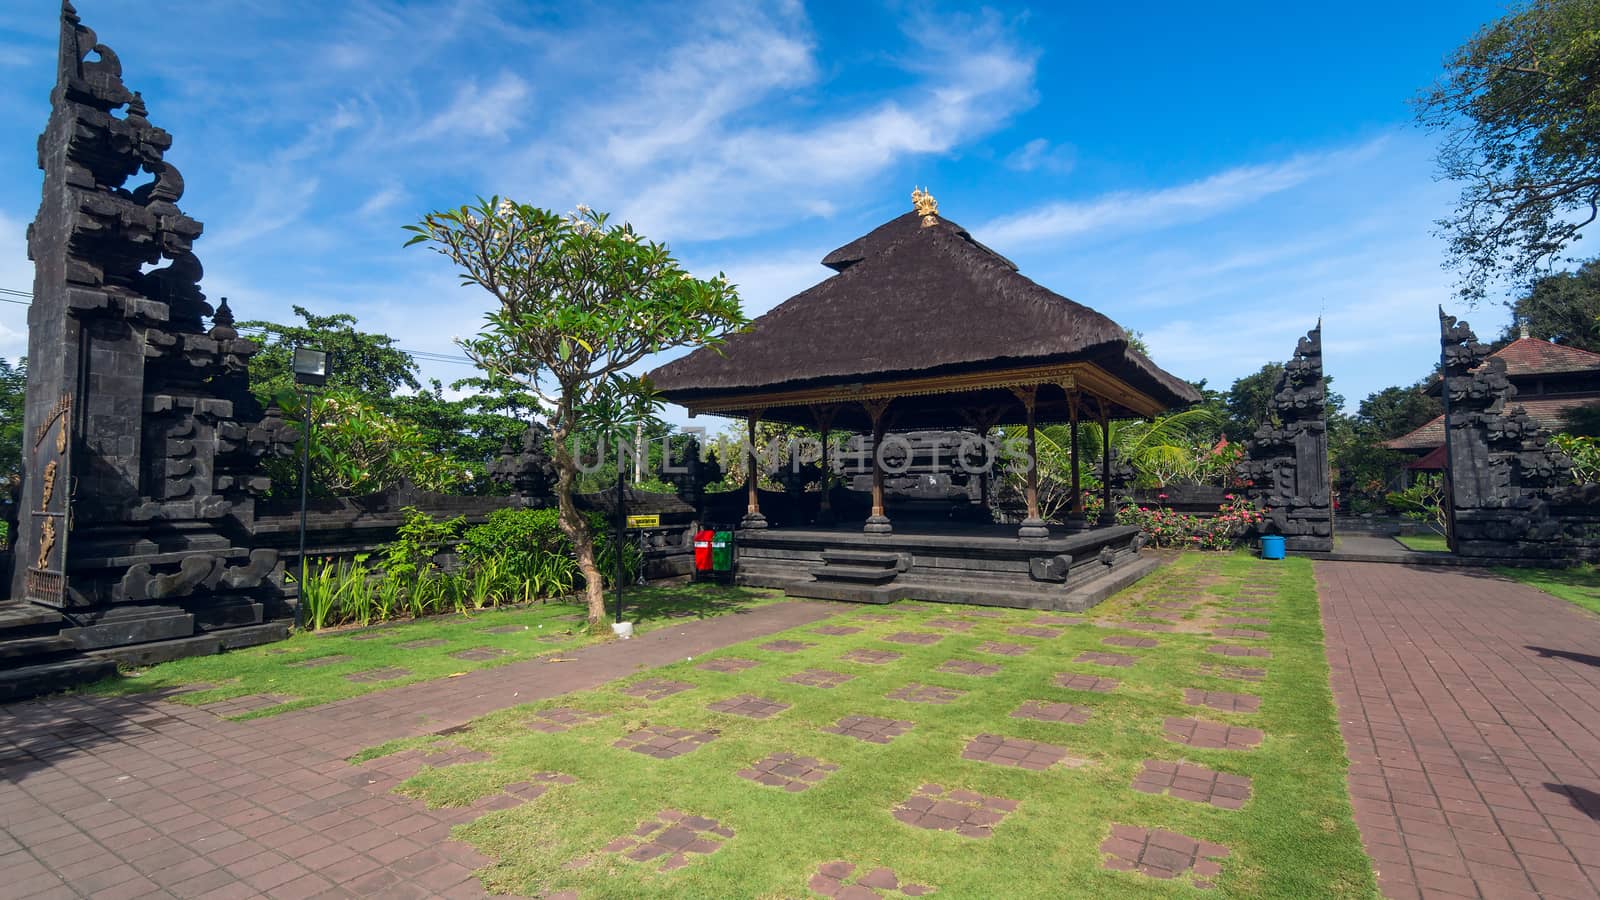 Famouse old temple on island Bali in Indonesia by BIG_TAU